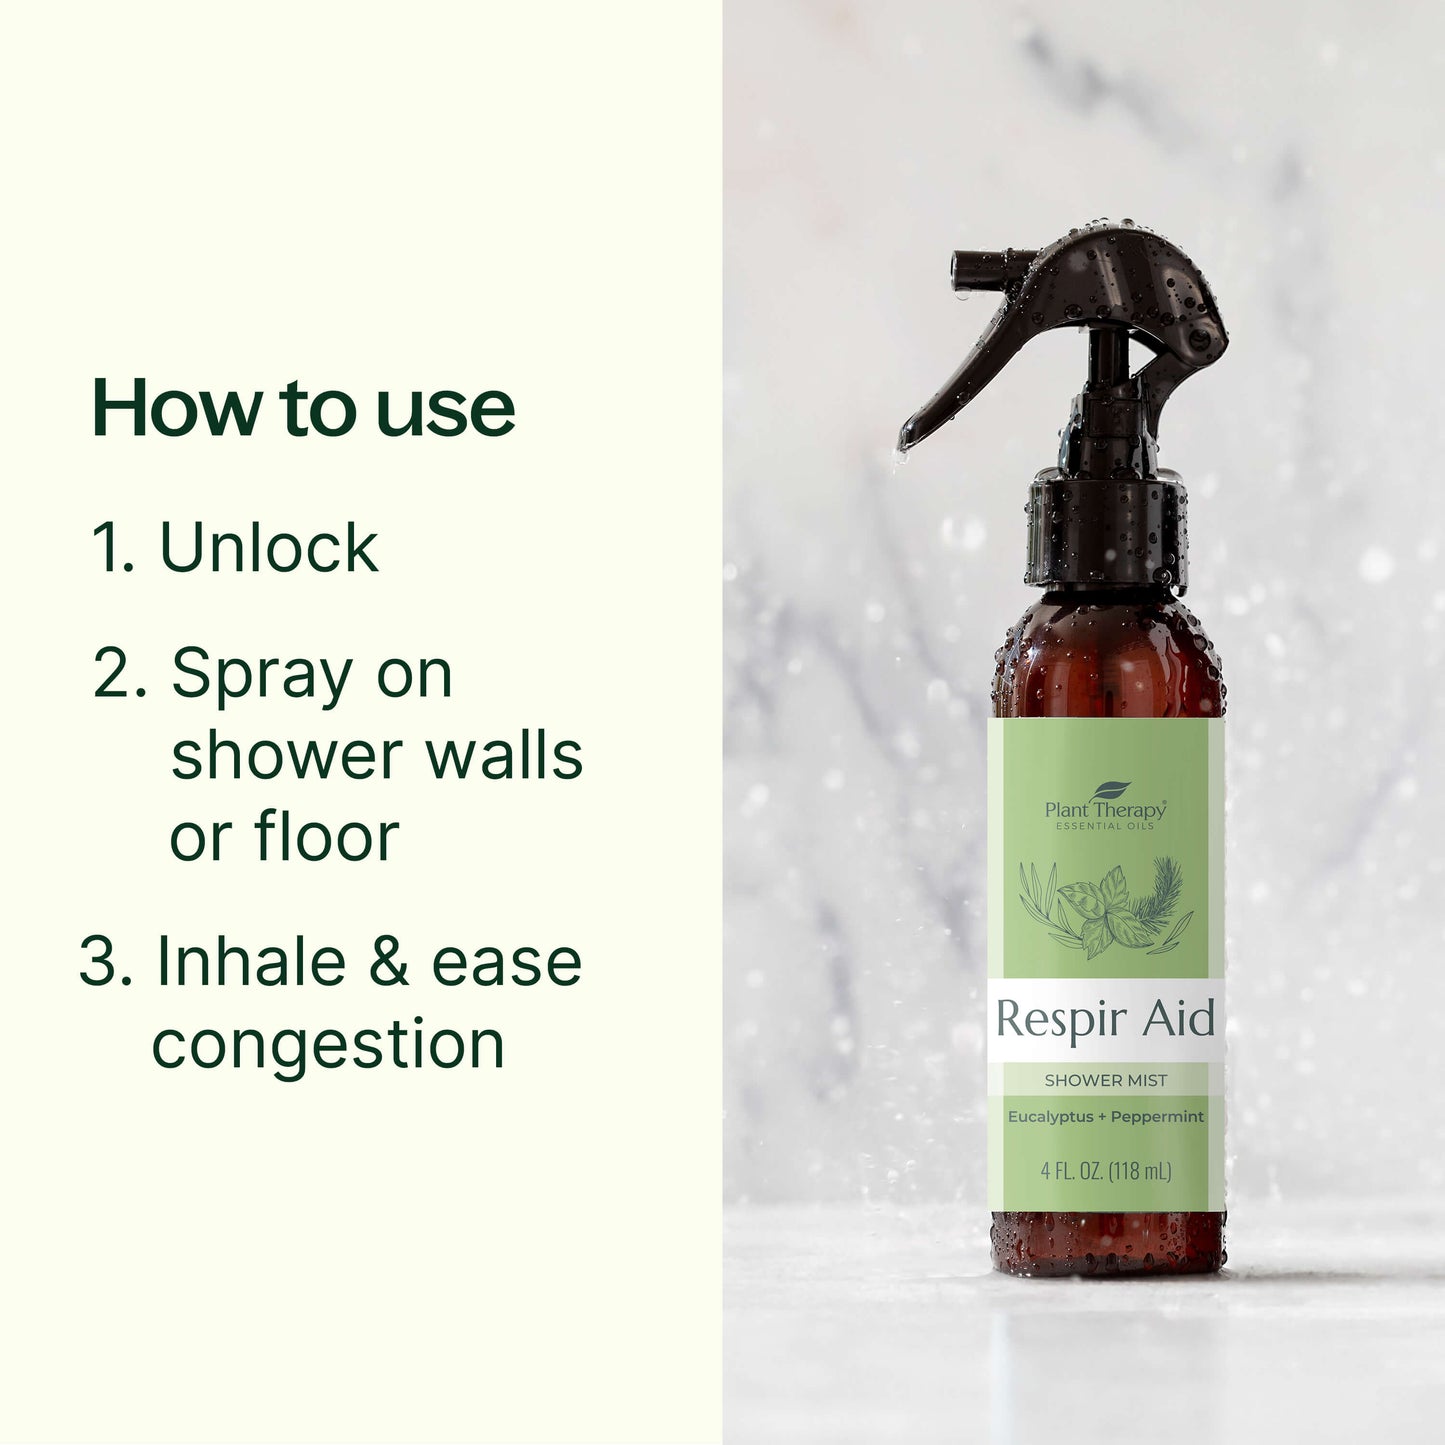 how to use Respir Aid Shower Mist